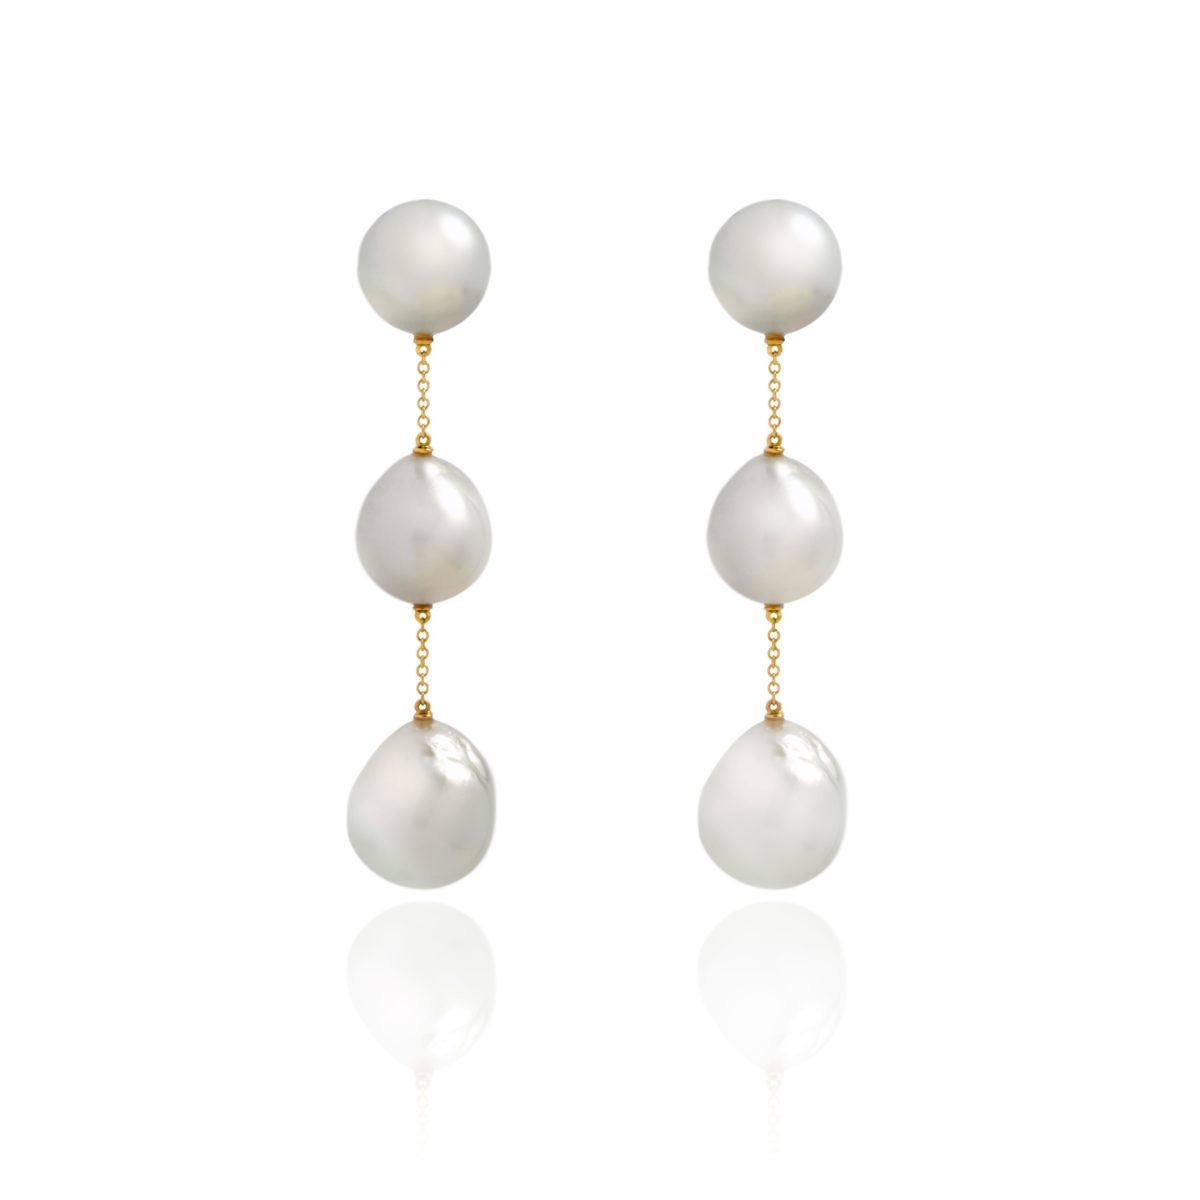 The Happy Pearls Earrings – An Order of Bling